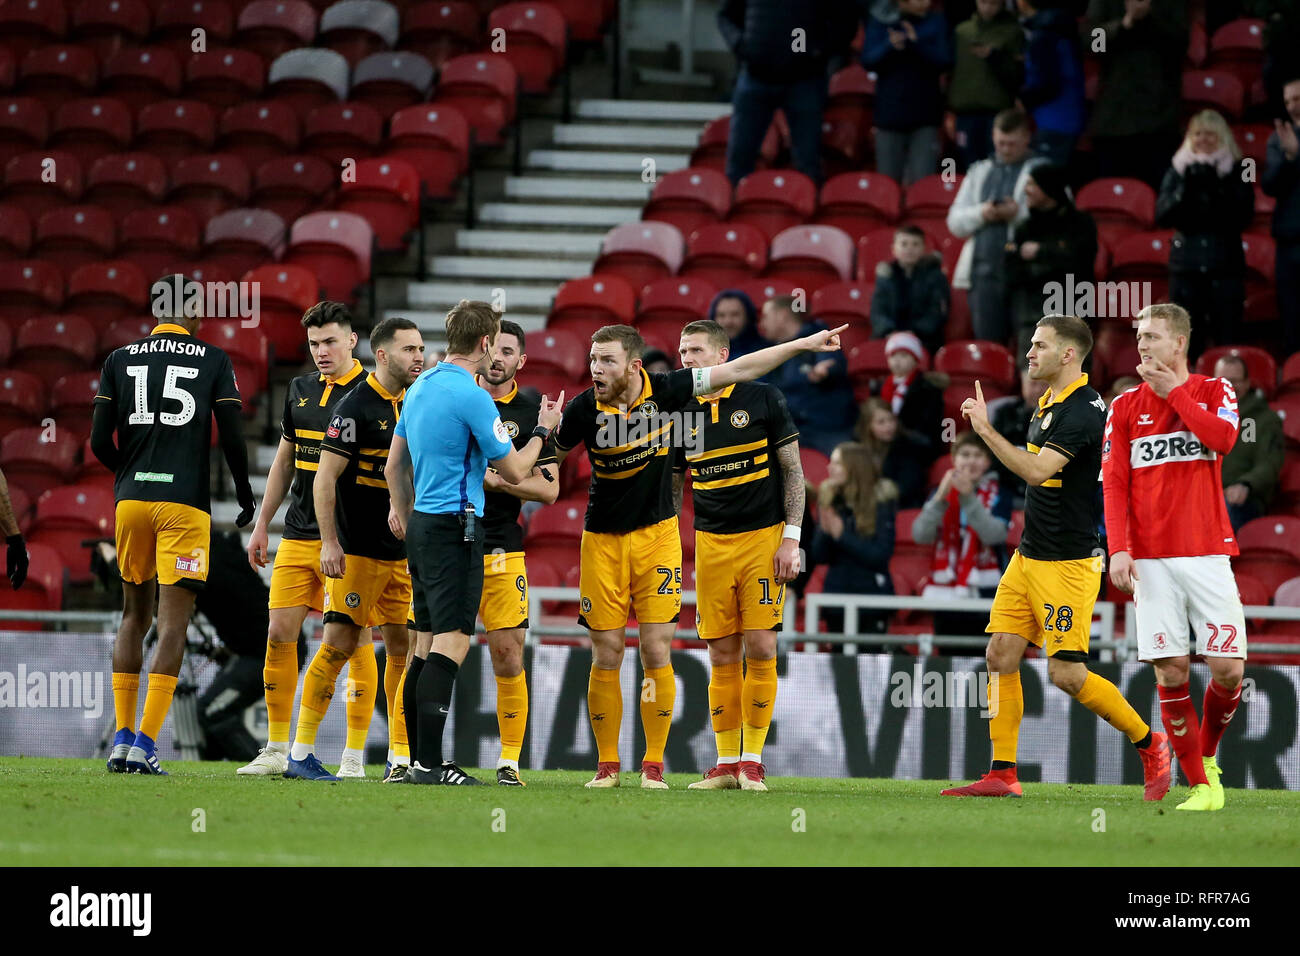 Newport County players react after Middlesbrough are awarded a free kick during the FA Cup fourth round match at Riverside Stadium, Middlesbrough. Stock Photo